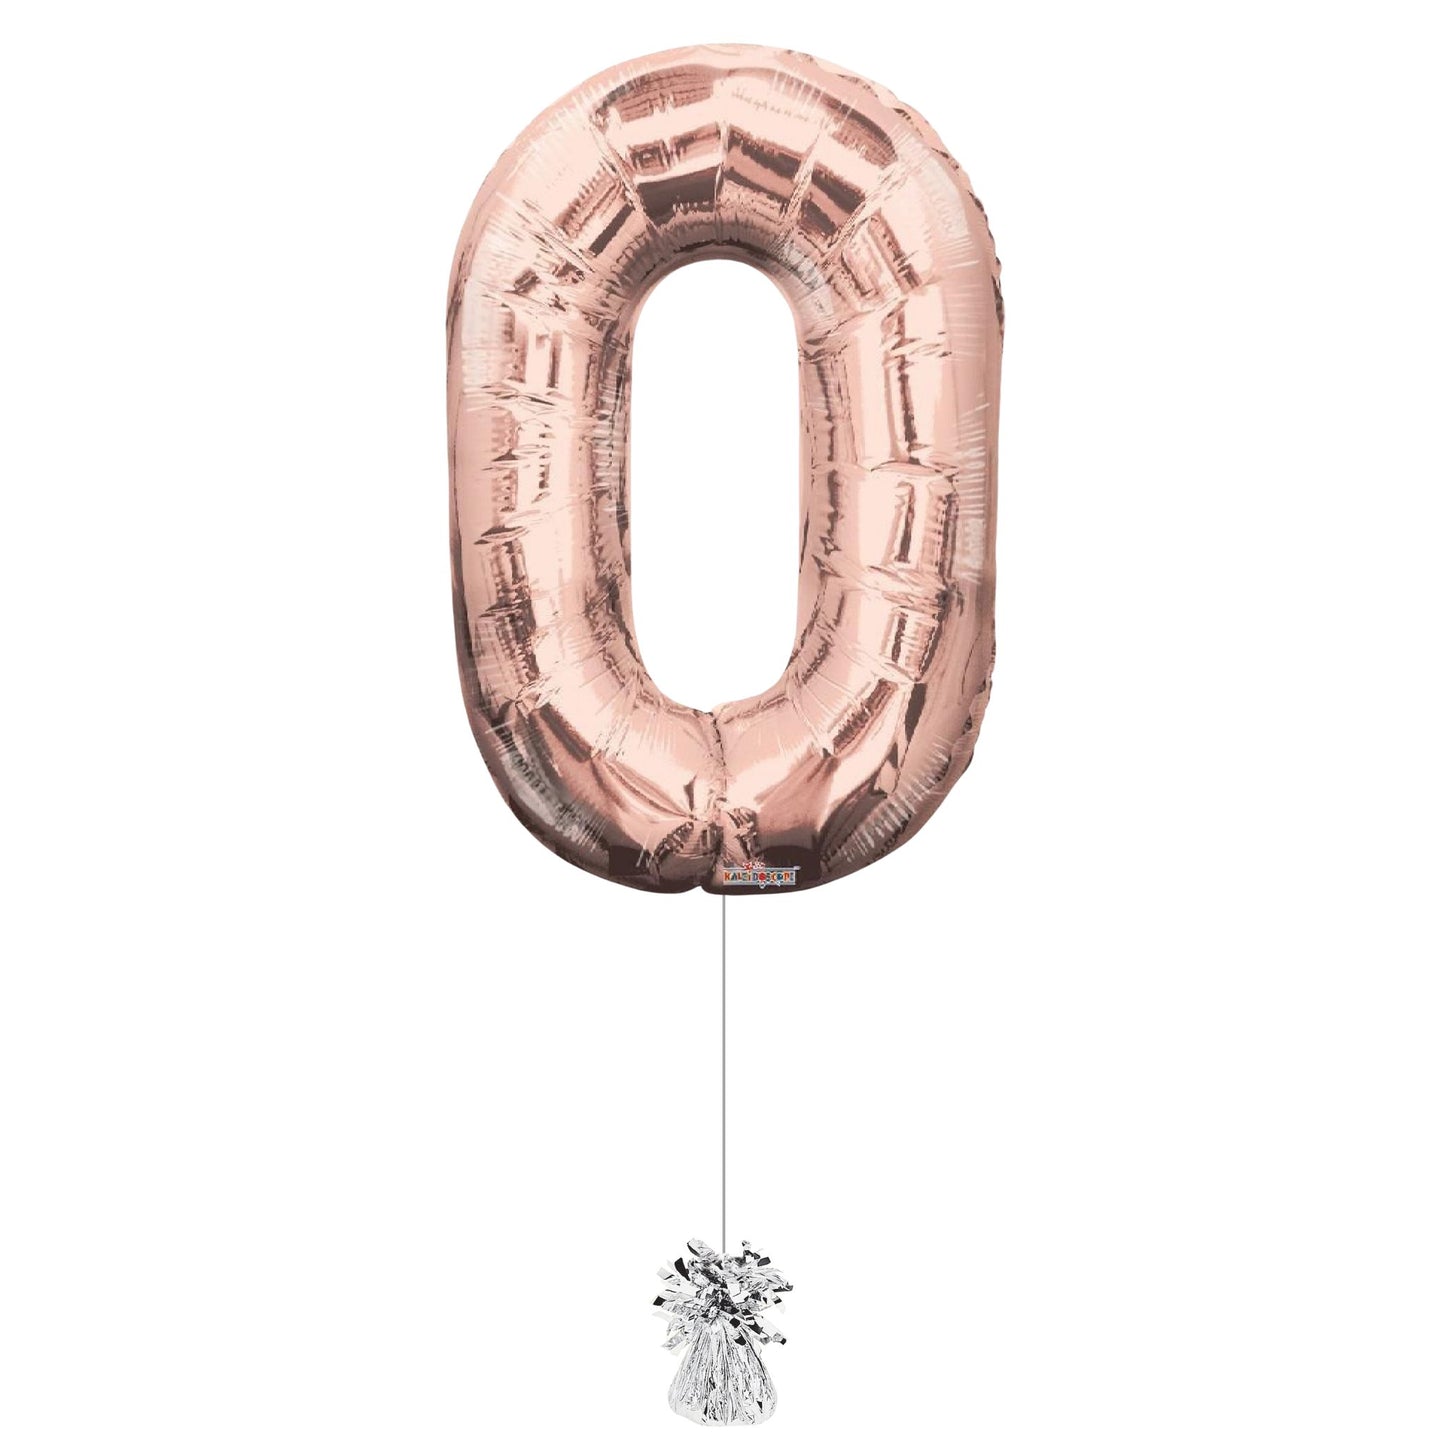 34 inch Rose Gold Balloon Number 0 Helium filled